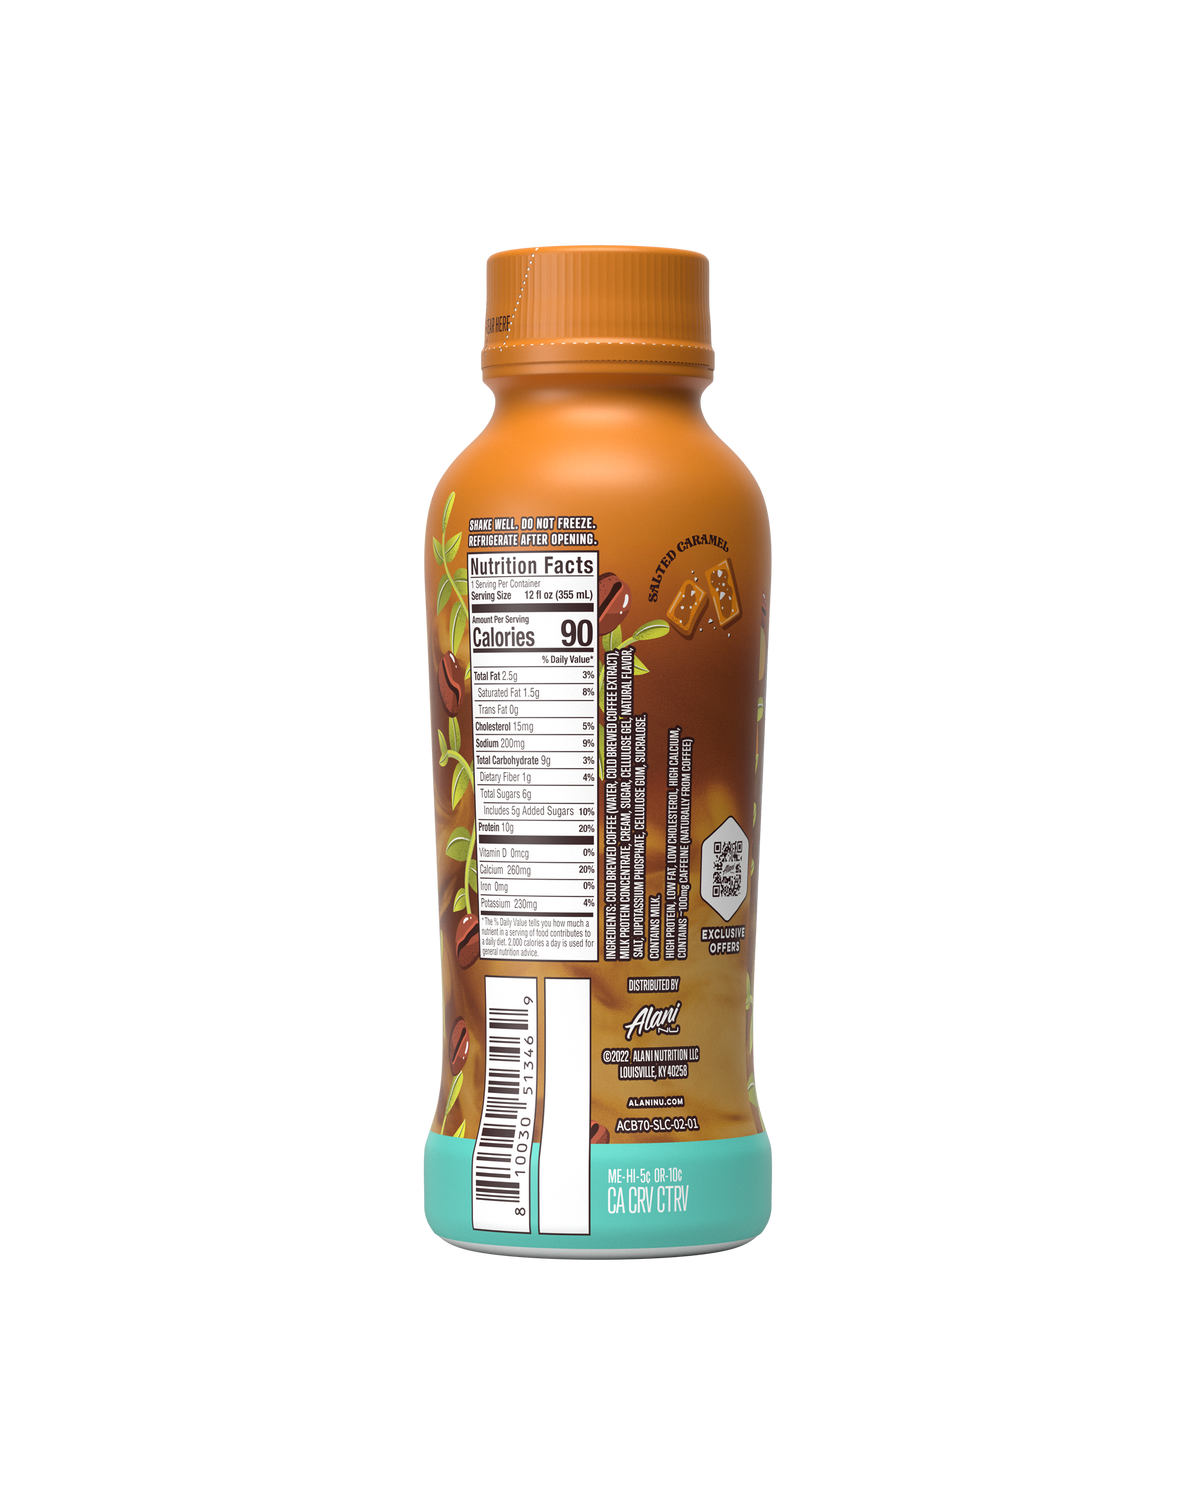 A back view of Coffee in Salted Caramel flavor highlighting nutrition facts.